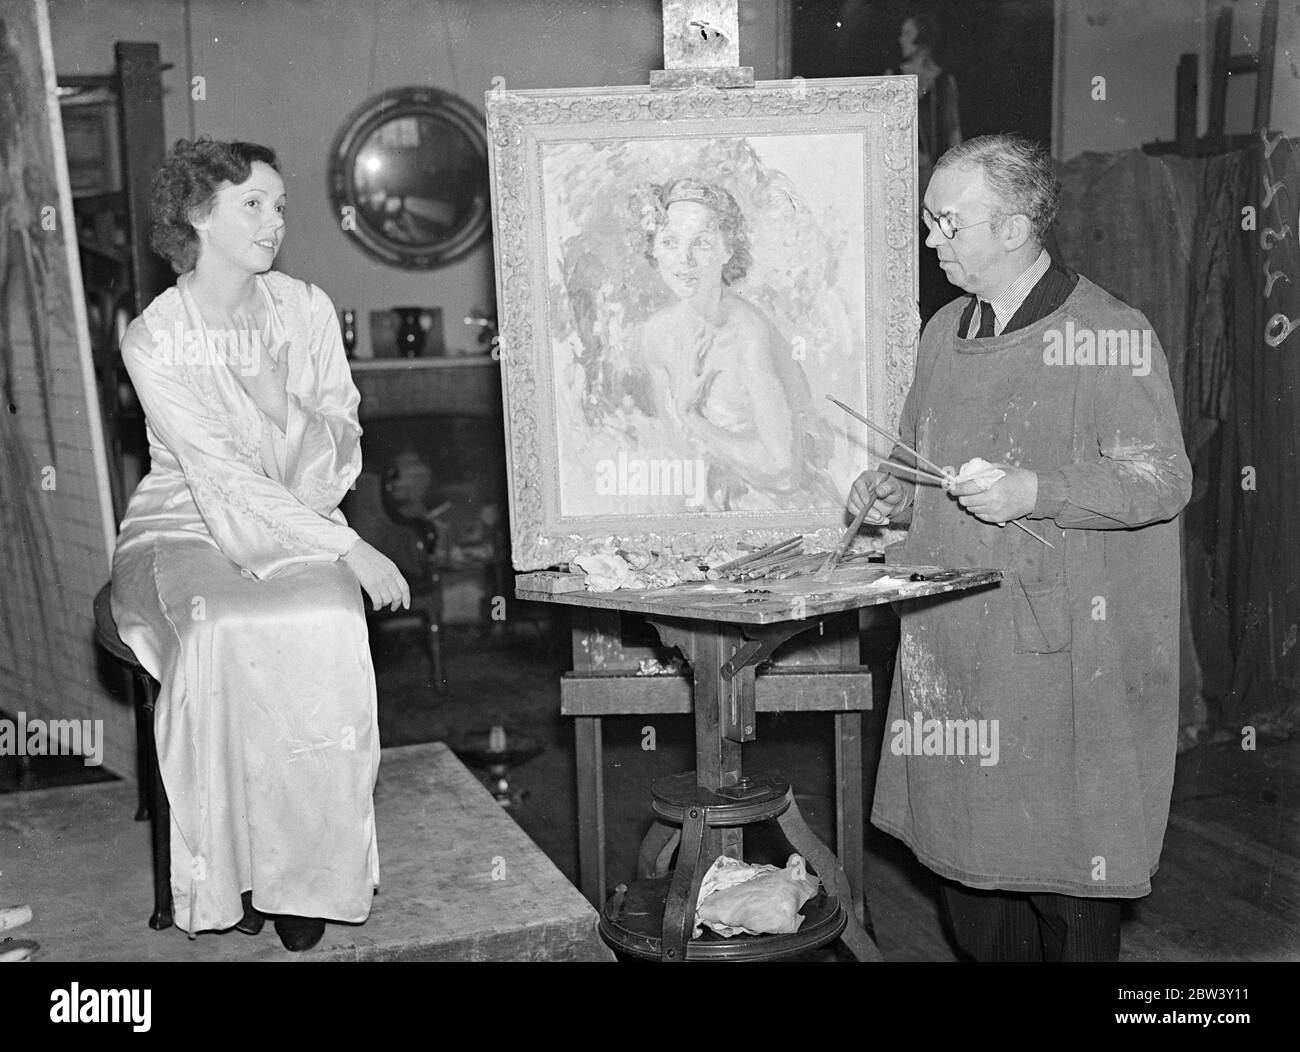 Jessie Matthew ' s portrait for Royal Academy . A portrait of Miss Jessie Matthews , the stage and film actress is being painted by Mr T C Dugdale , ARA , at his London studios , for entry in this year ' s Royal Academy . The actress is pictured against a woodland background . Photo shows , Miss Jessie Matthews sitting for her portrait on which Mr TC Dugdale is working at his London studios . 10 March 1937 Stock Photo